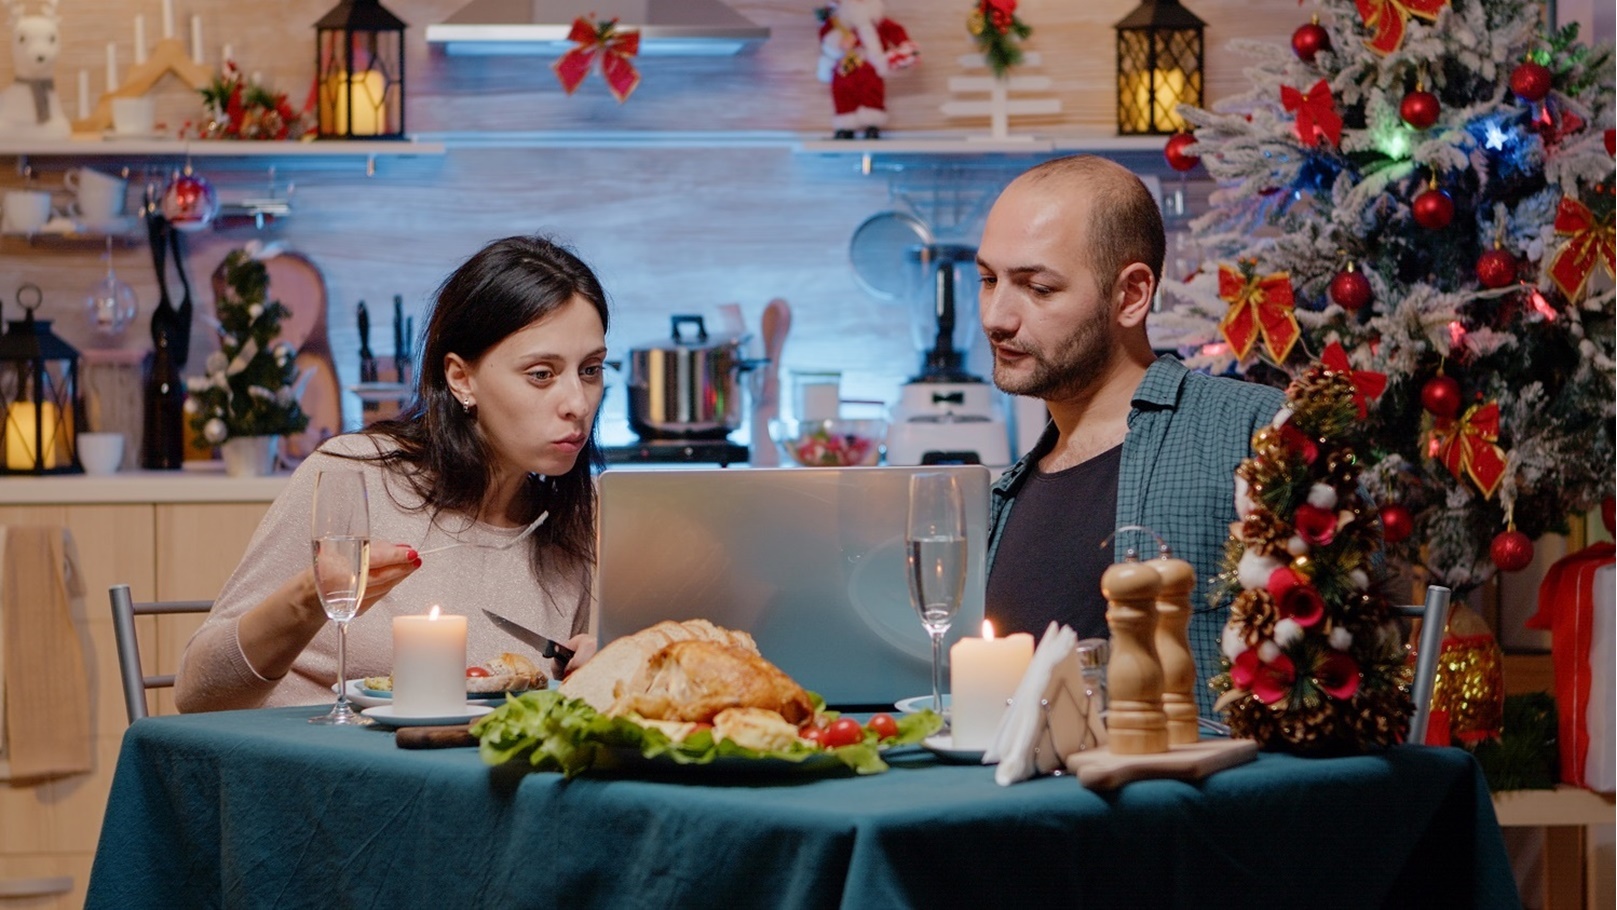 couple-looking-at-laptop-and-eating-festive-meal-2021-10-12-05-35-47-utc